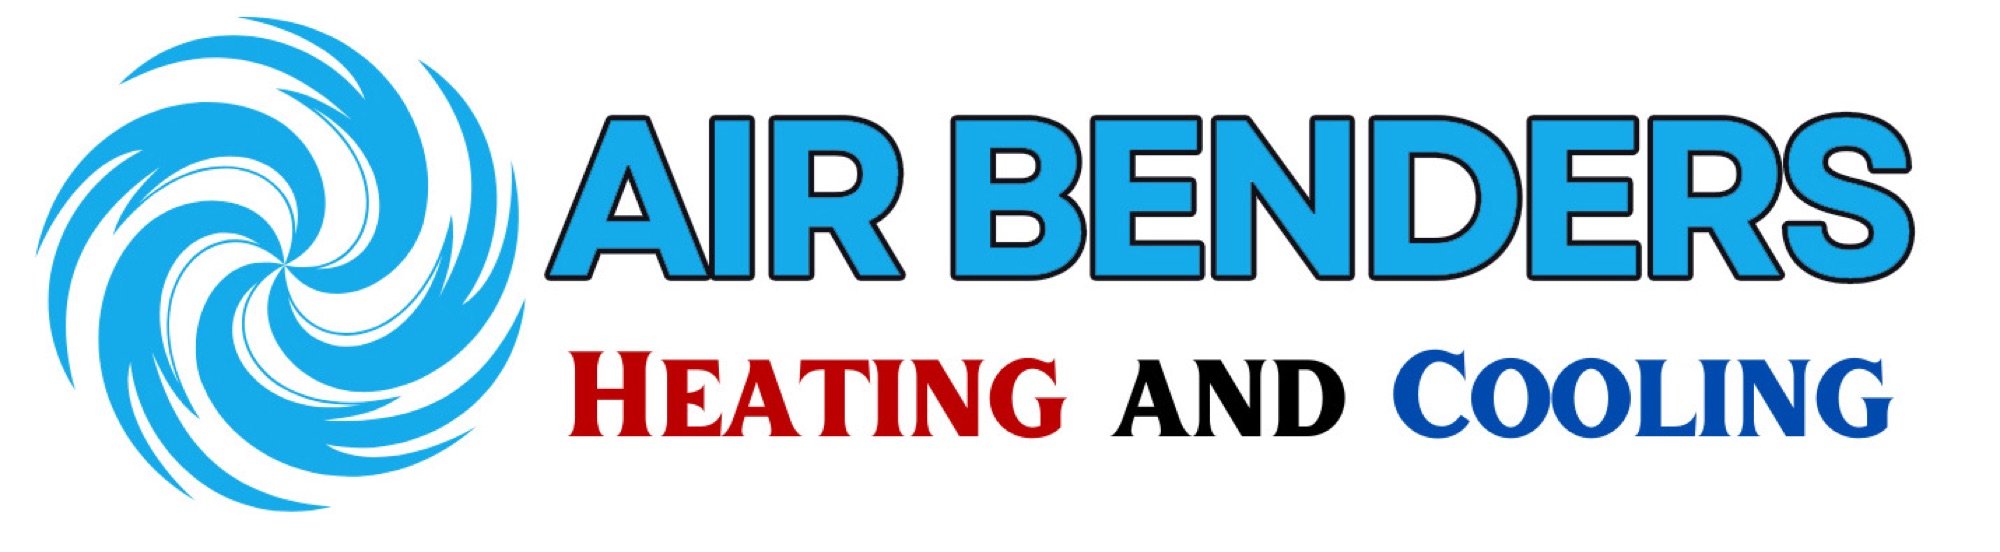 Air Benders Heating and Cooling, LLC Logo